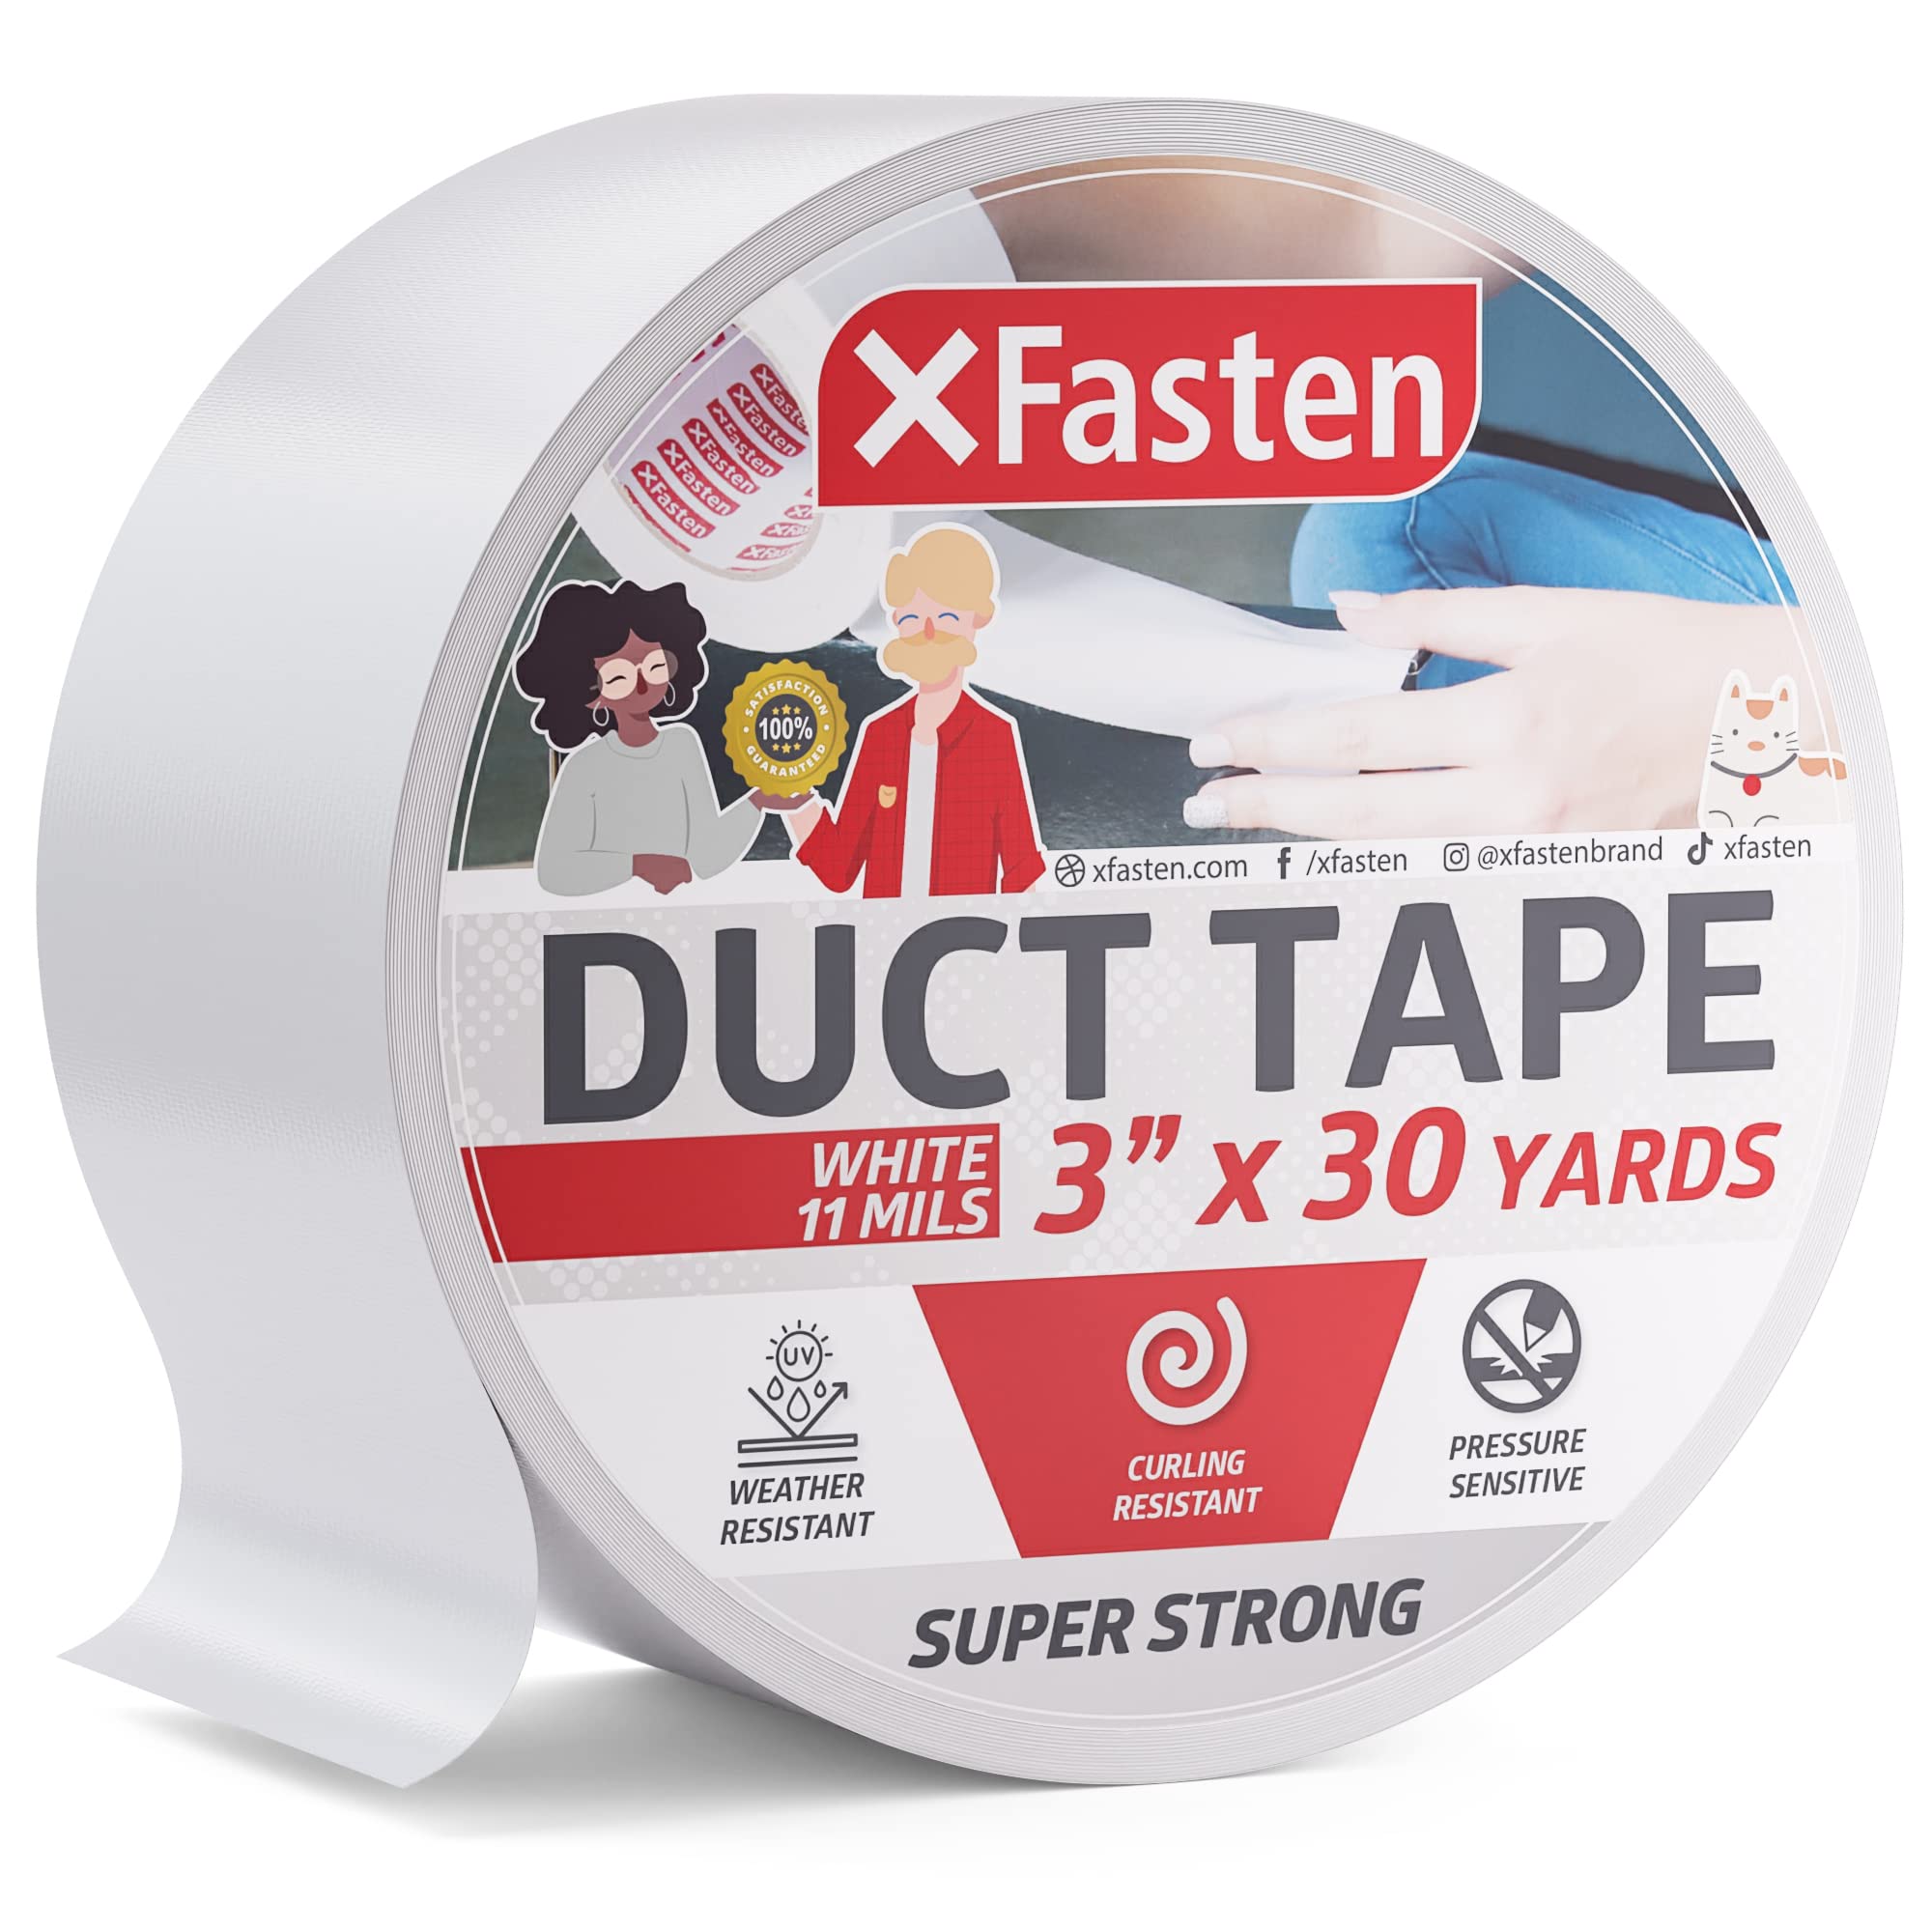 XFasten Double Sided Tape Removable, 1.5-inch by 15-Yards (Pack of 3)